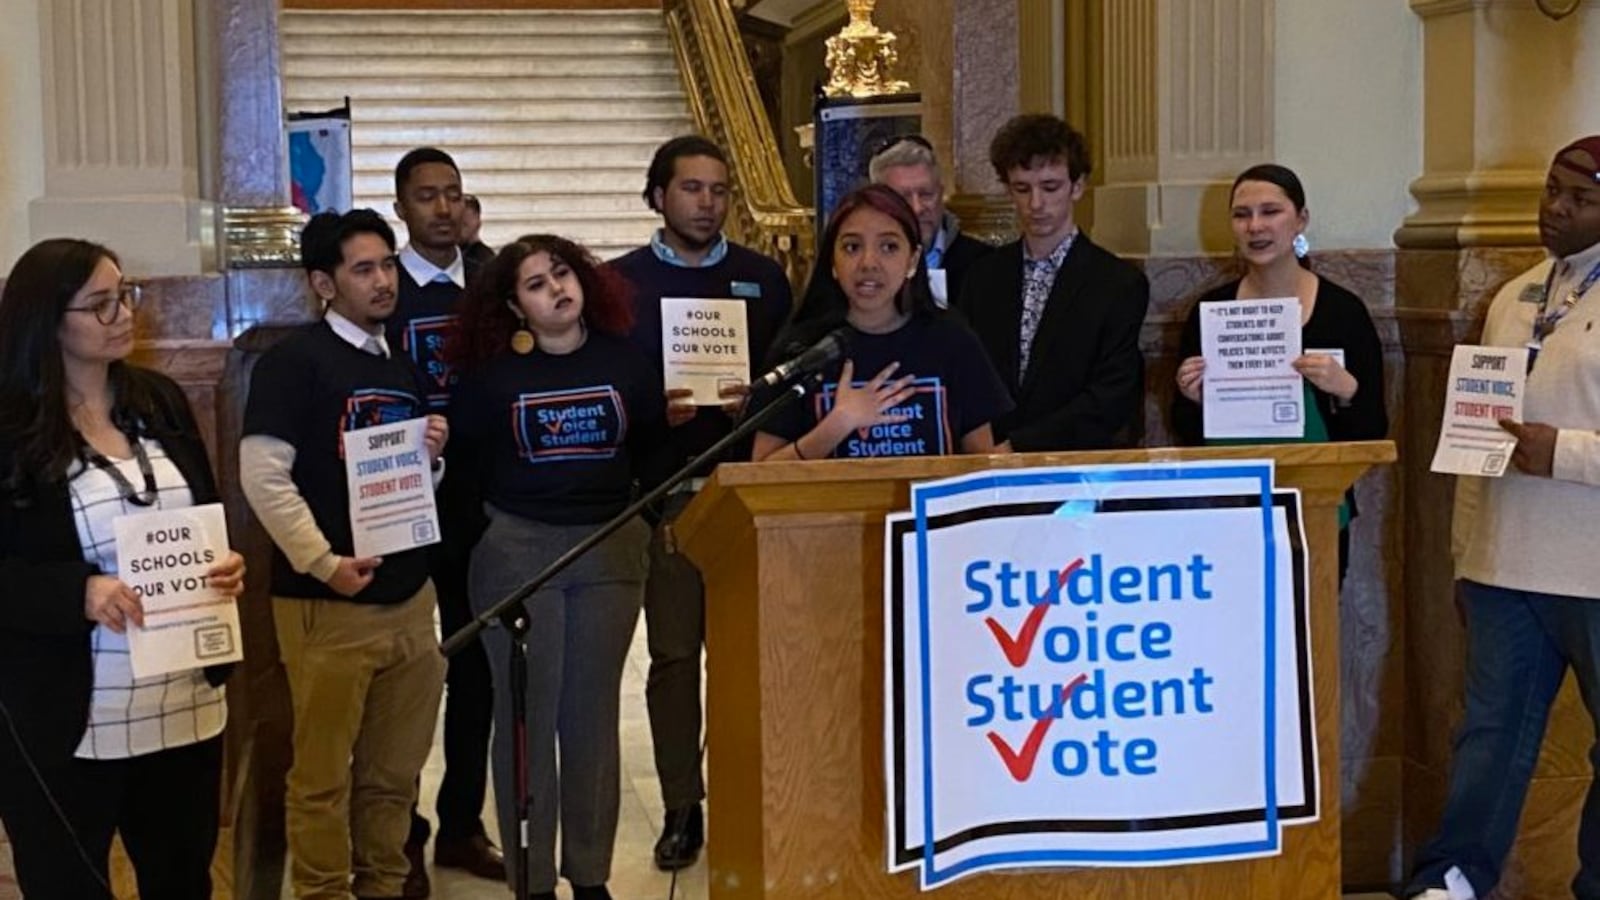 Kayla Morrison, a sophomore at Denver's South High School, speaks in support of 16-year-olds voting in school board elections, surrounded by supporters, including state Rep. Serena Gonzales-Gutierrez (far left) and Denver school board member Tay Anderson (far right).